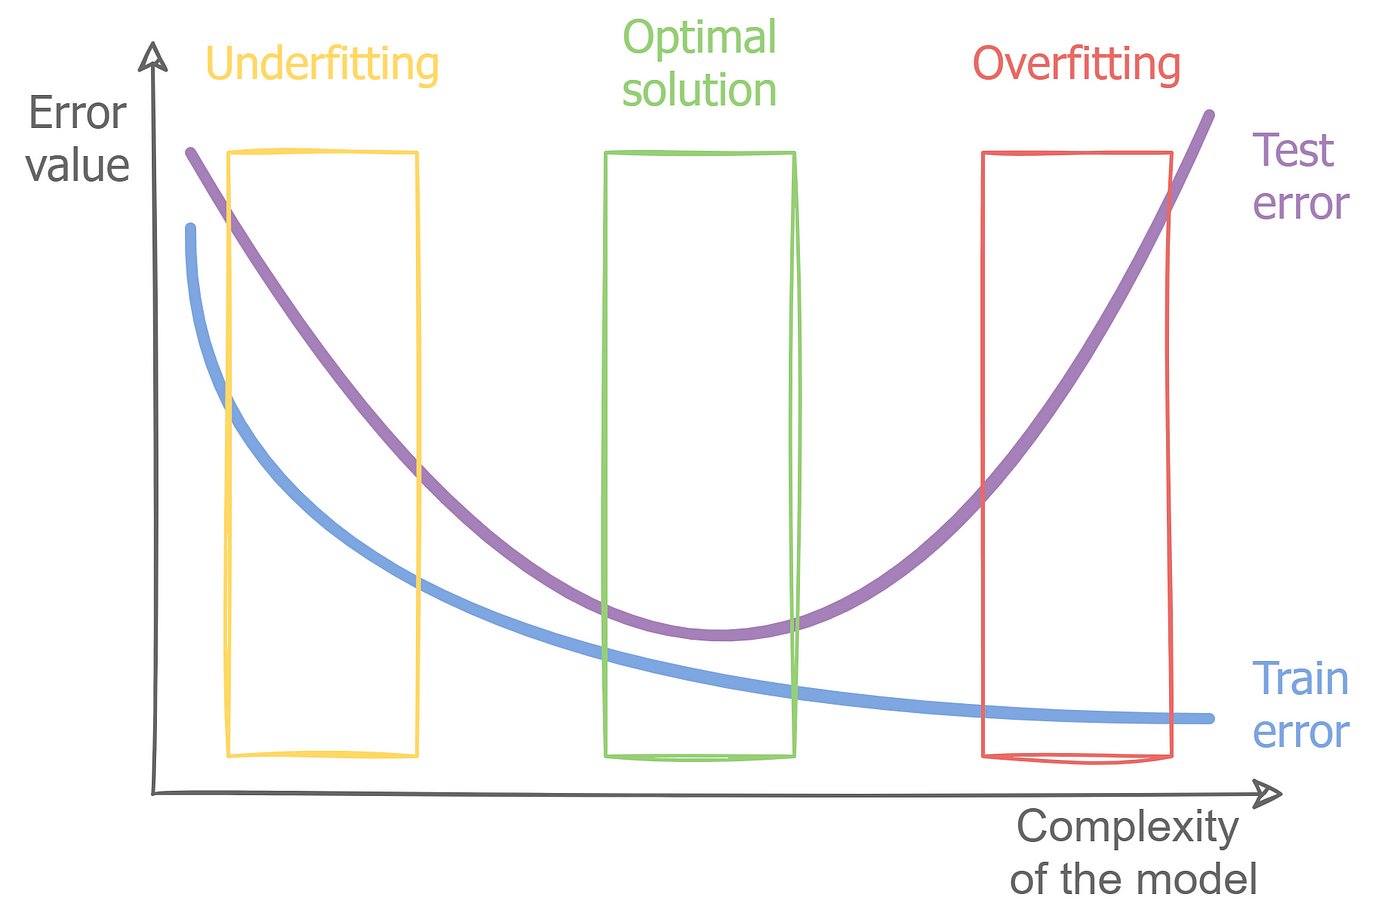 What Are Overfitting and Underfitting?, by Dooinn KIm